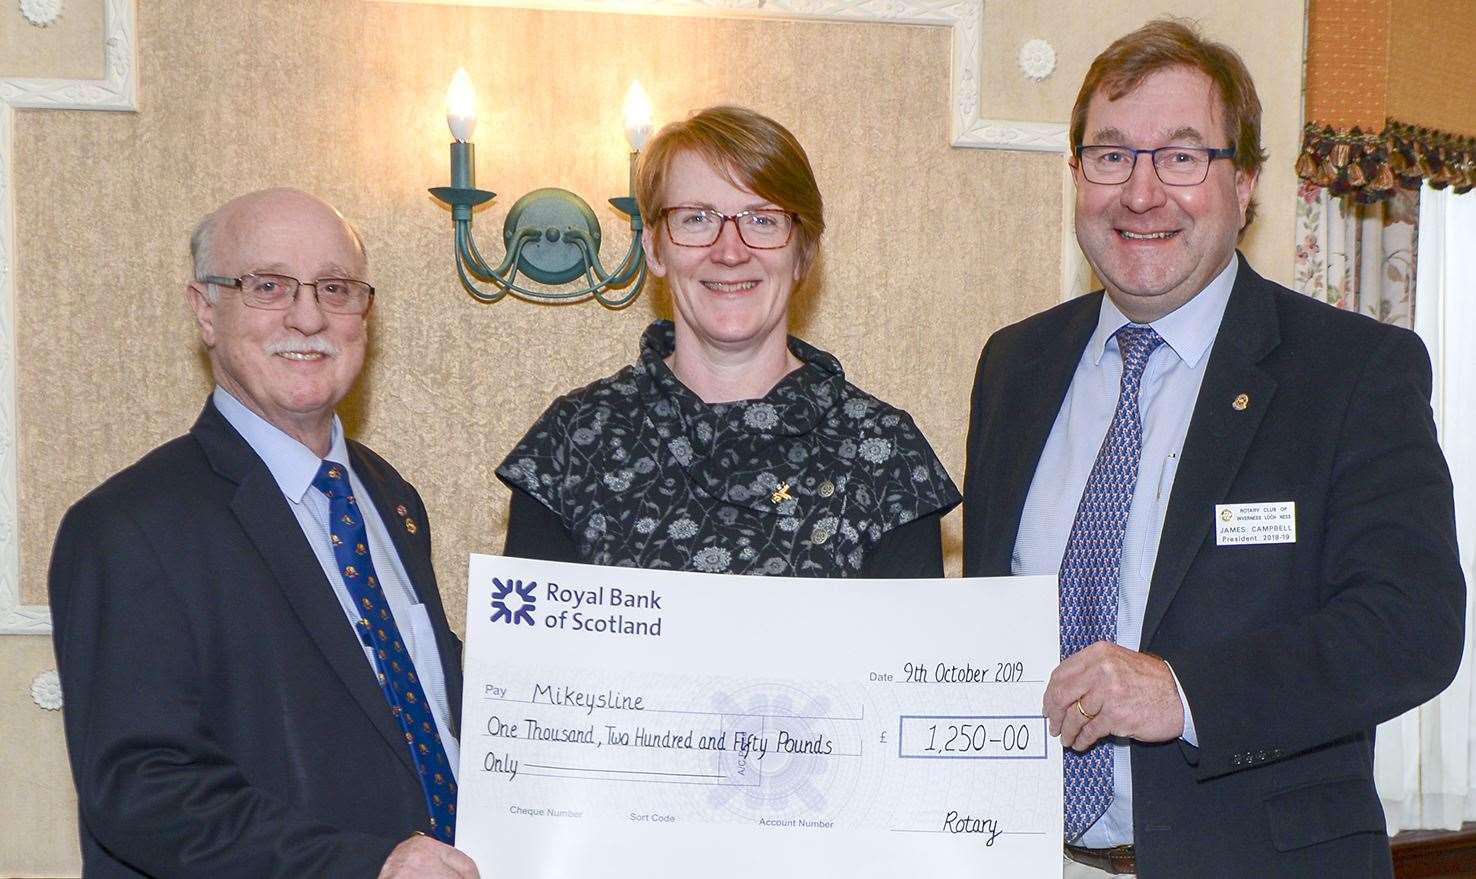 Mikeysline’s Donna Smith (centre) with Rotary Club members Nicol Manson and James Campbell.